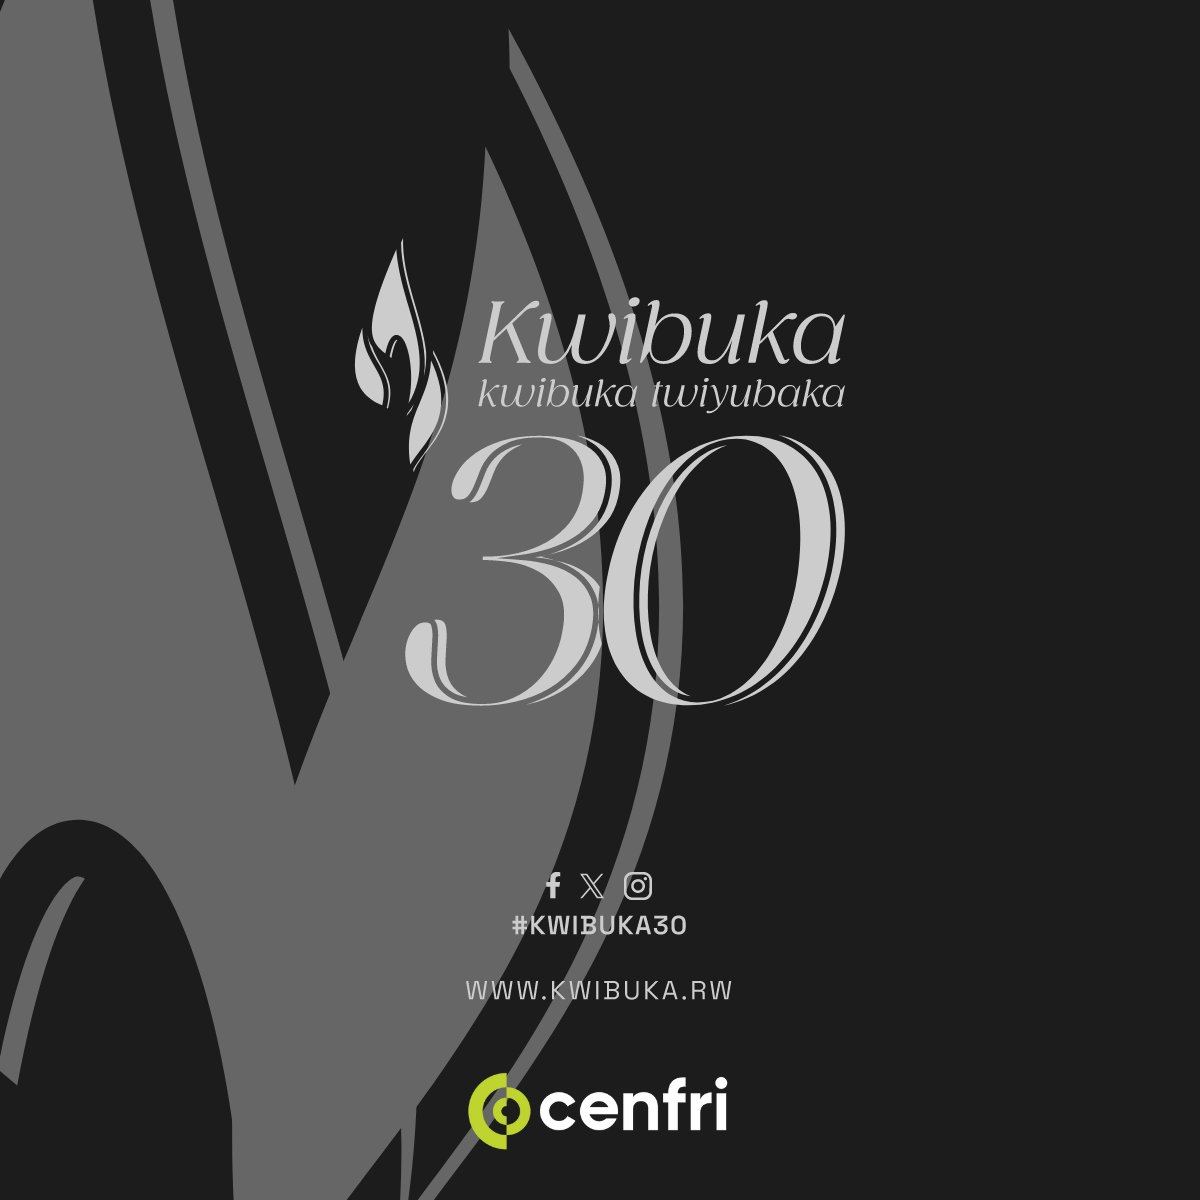 Today we mark the 30th commemoration of the genocide against the Tutsi in Rwanda. Our hearts are with all Rwandans as we remember the lives lost and comfort the survivors. Remember, unite, renew. #Kwibuka30